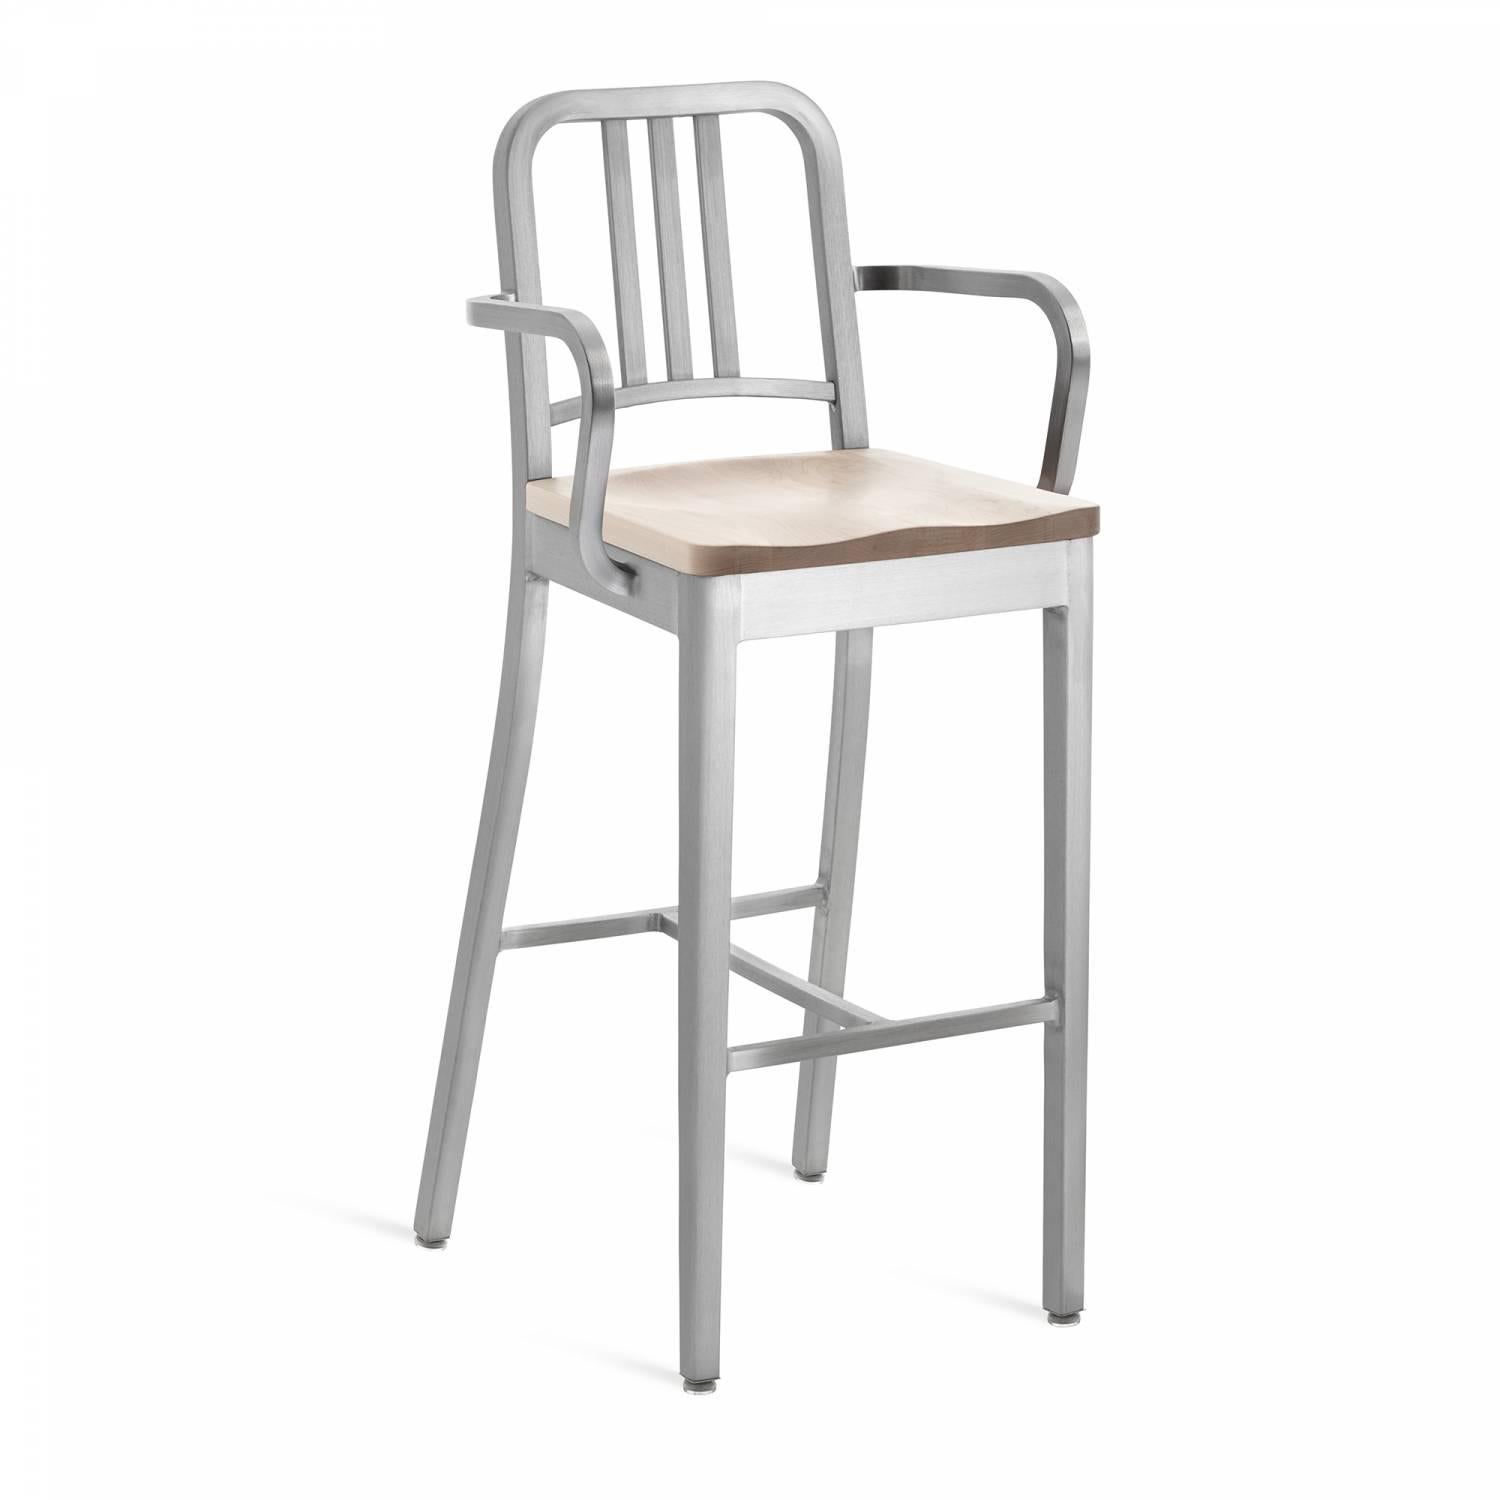 First built for use on submarines in 1944, the Navy chair has been in continuous Production ever since. With the famous 77 step process, our craftsmen take soft, recycled aluminum, hand form and weld it- then temper it for strength. Finally, the